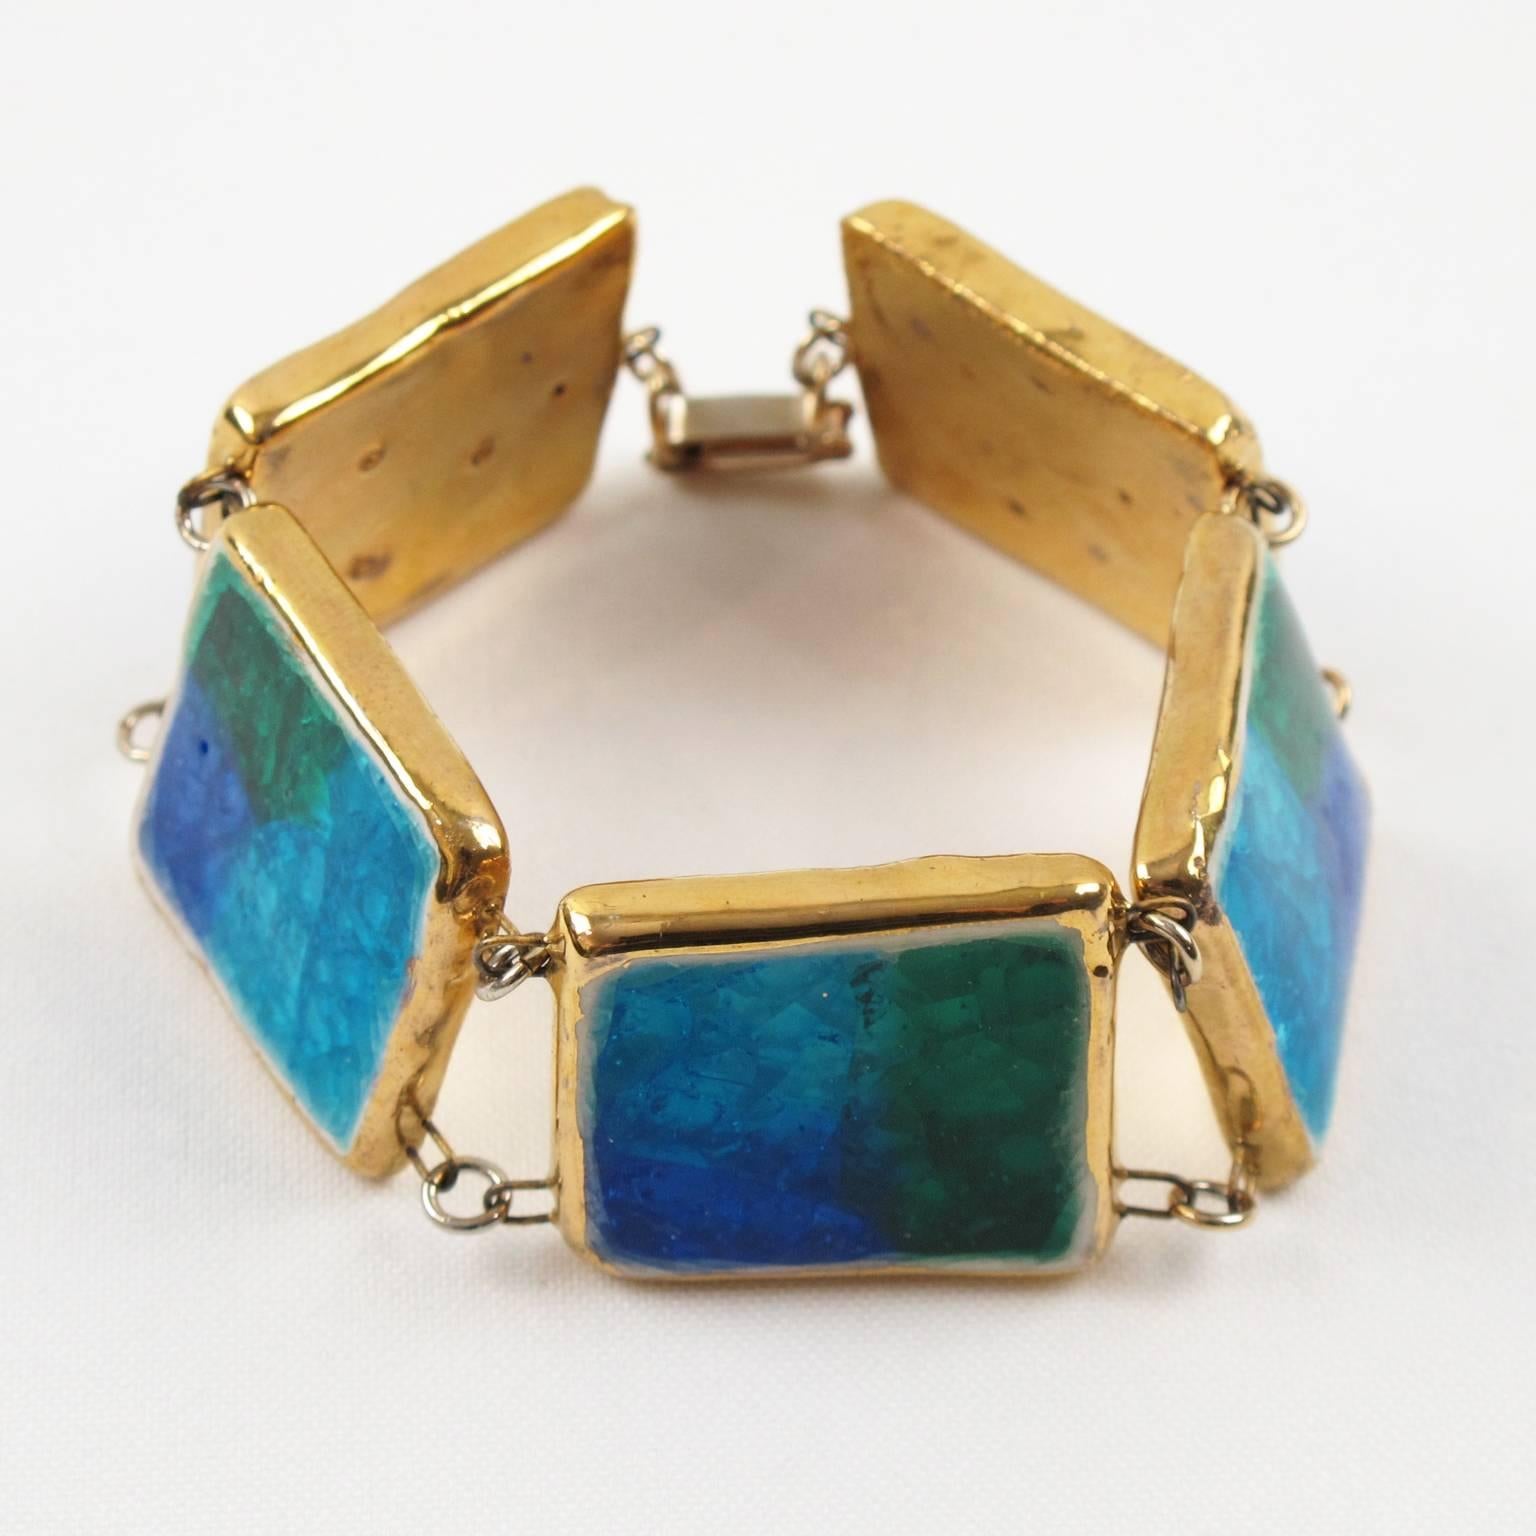 Rare Italian Mid-Century Modern link bracelet. Featuring rectangular ceramic elements with gilt enamel and gorgeous blue, turquoise and green glaze, topped with fused crackled glass. Typical Italian ceramic work of the 1960s, reminiscent of Bitossi